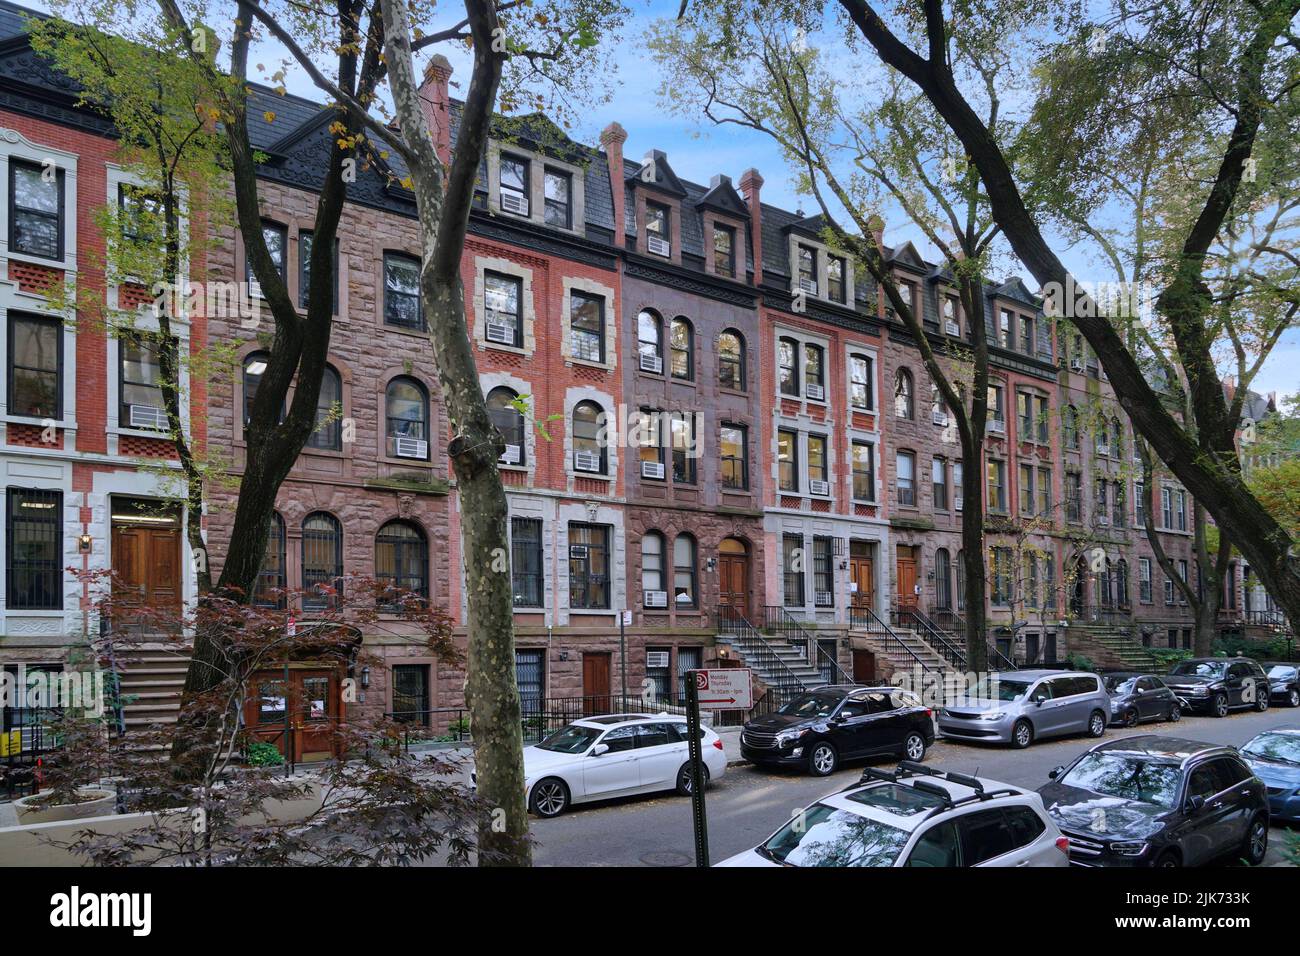 Residential street in New York with long row of old brownstone townhouses Stock Photo